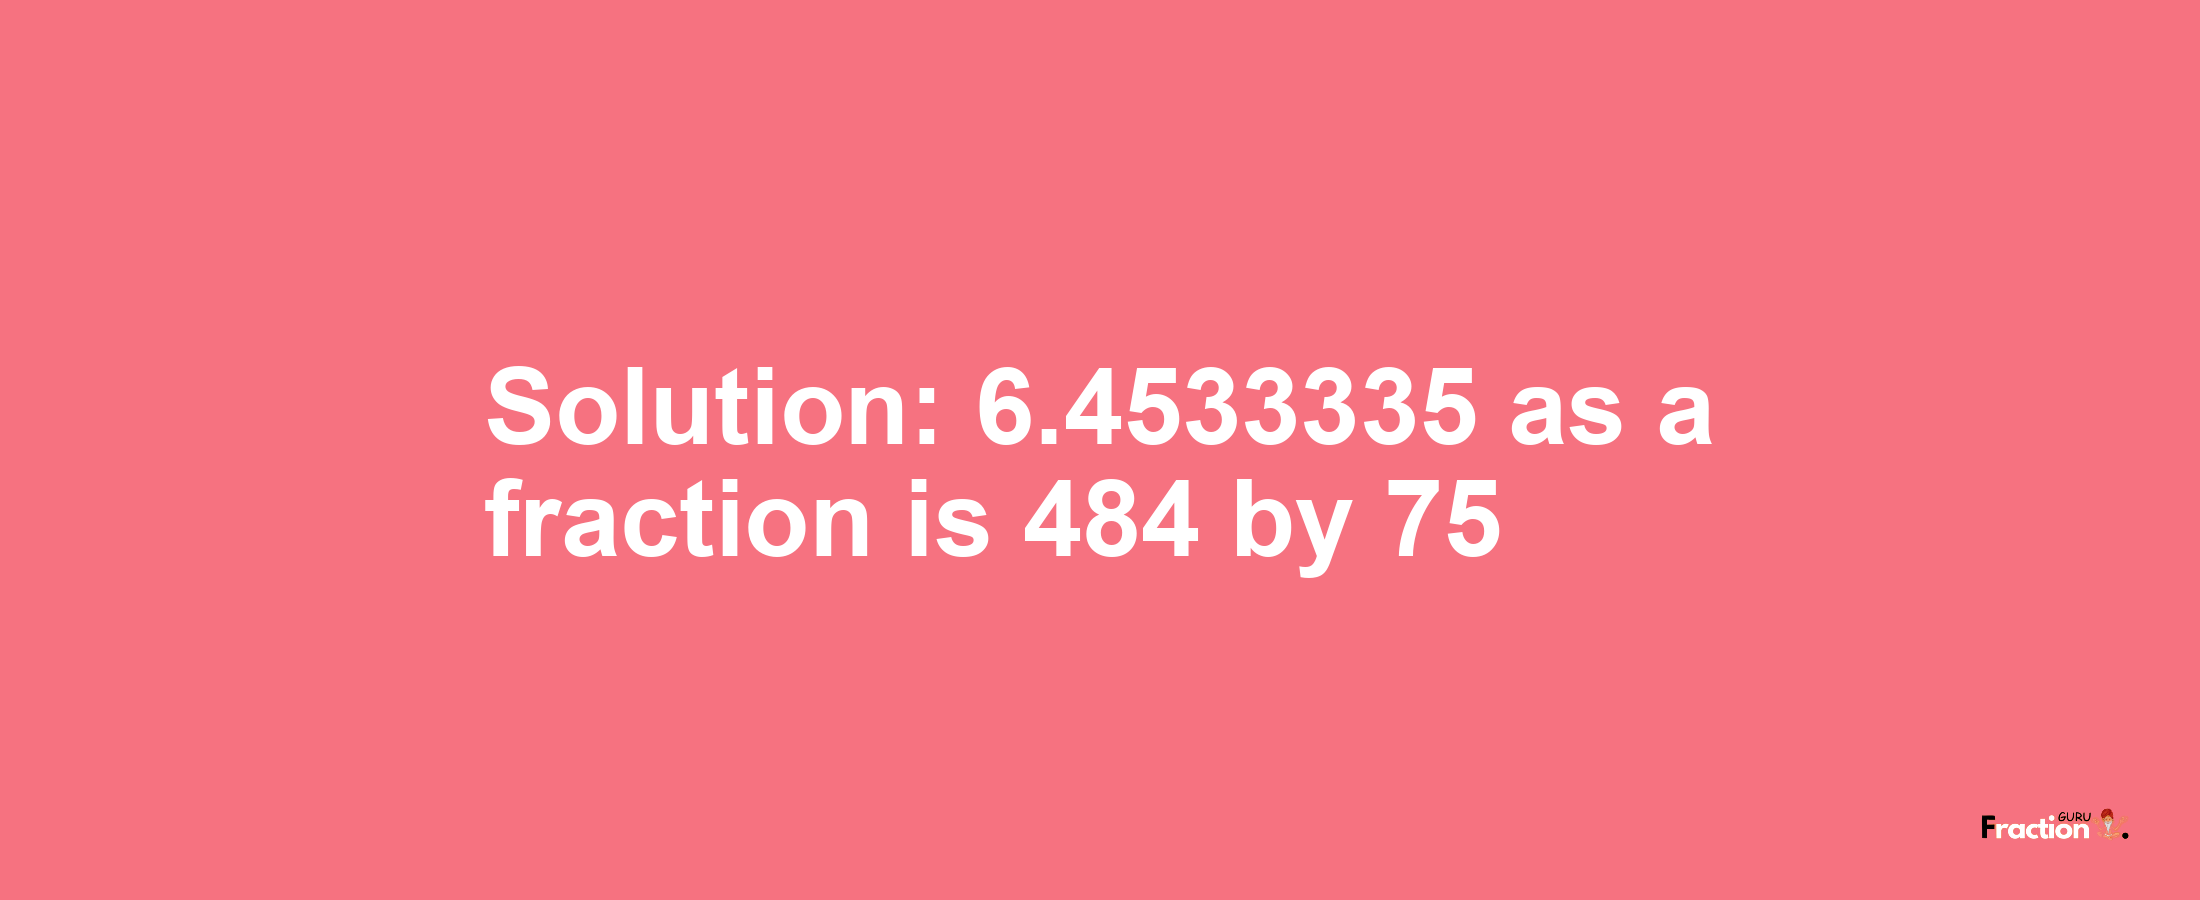 Solution:6.4533335 as a fraction is 484/75